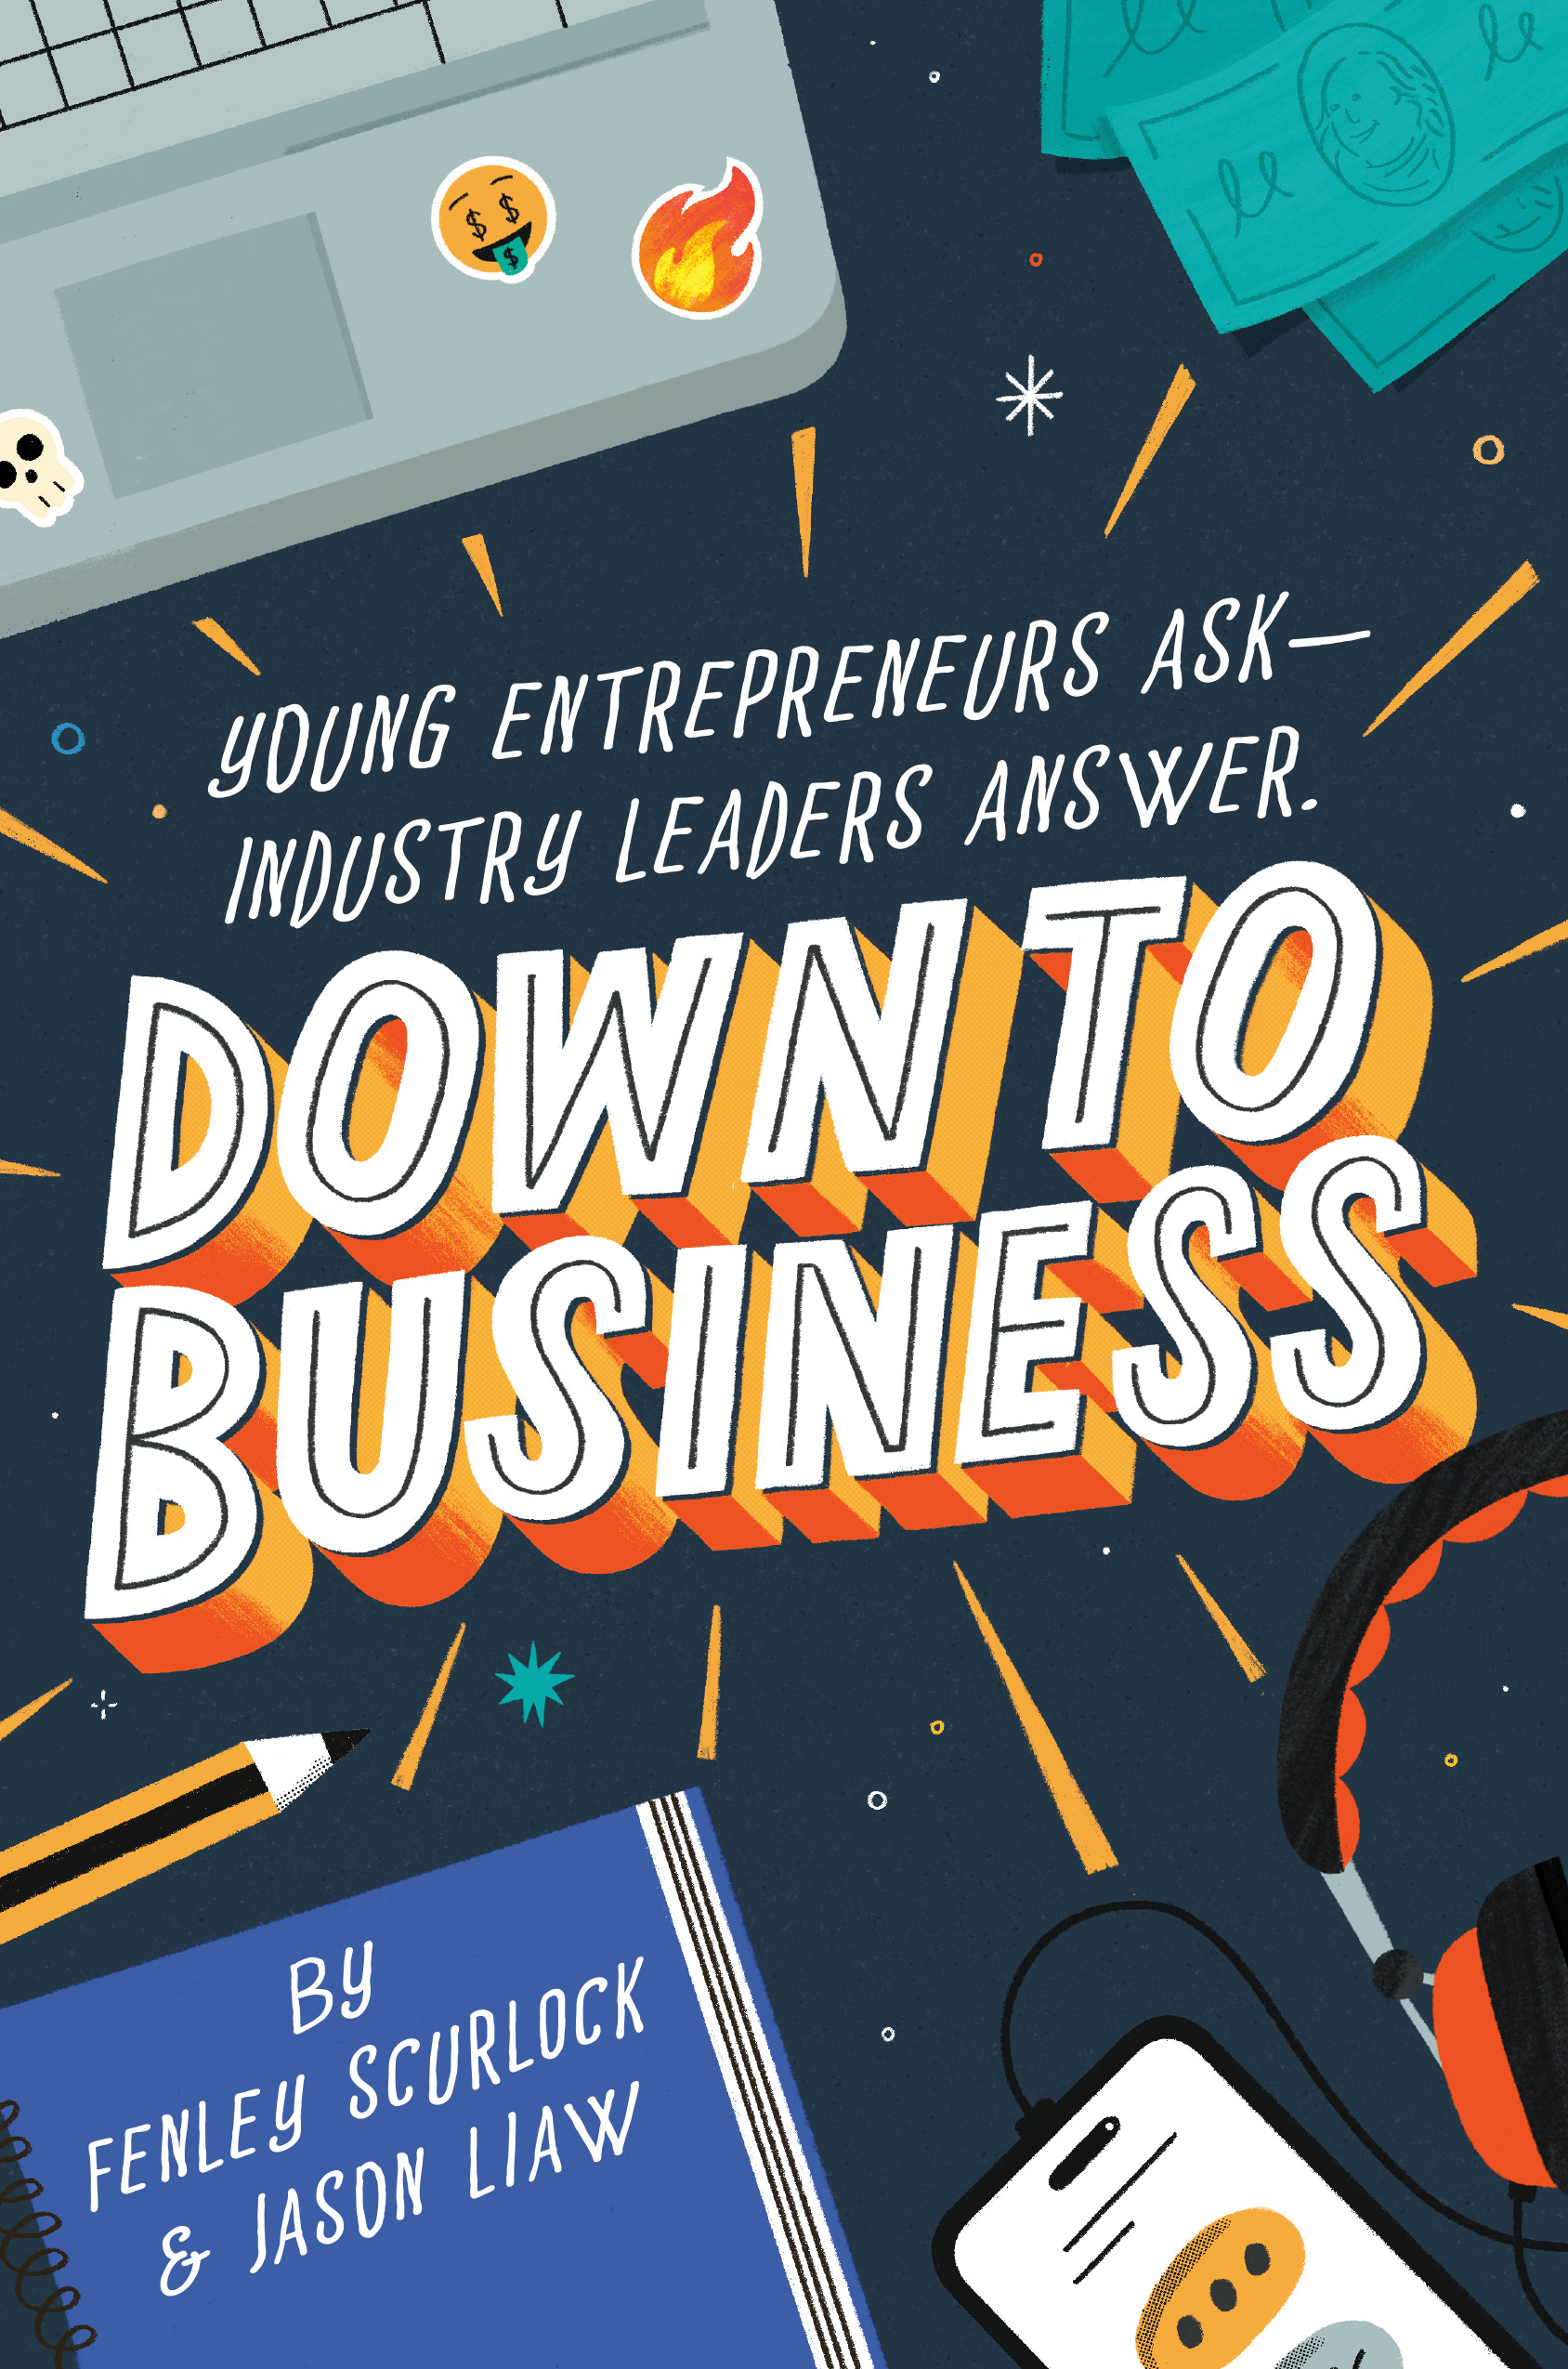 DOWN TO BUSINESS by Fenley Scurlock and Jason Liaw